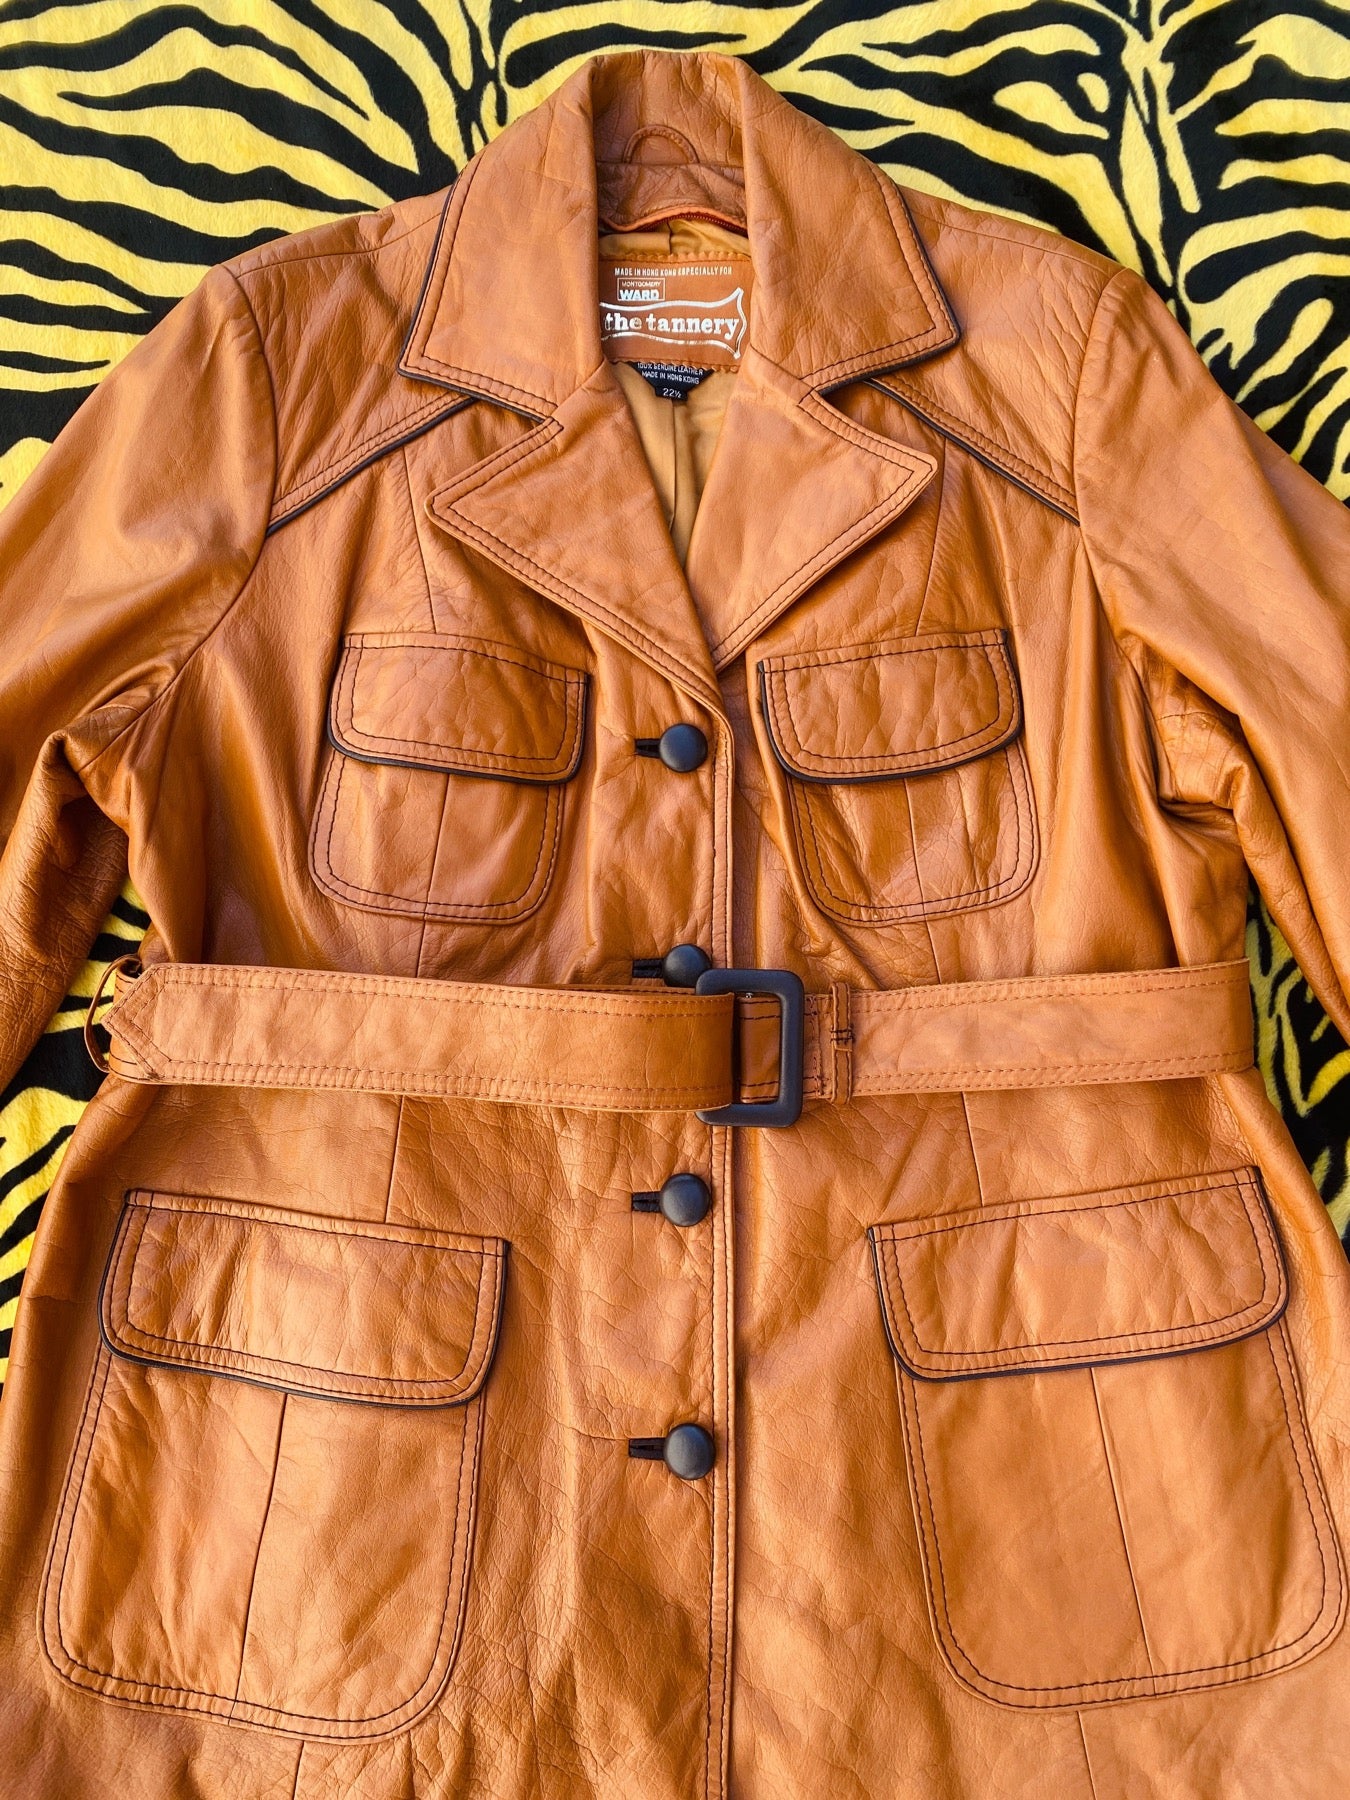 THE TANNERY MONTGOMERY WARD TAN LEATHER JACKET